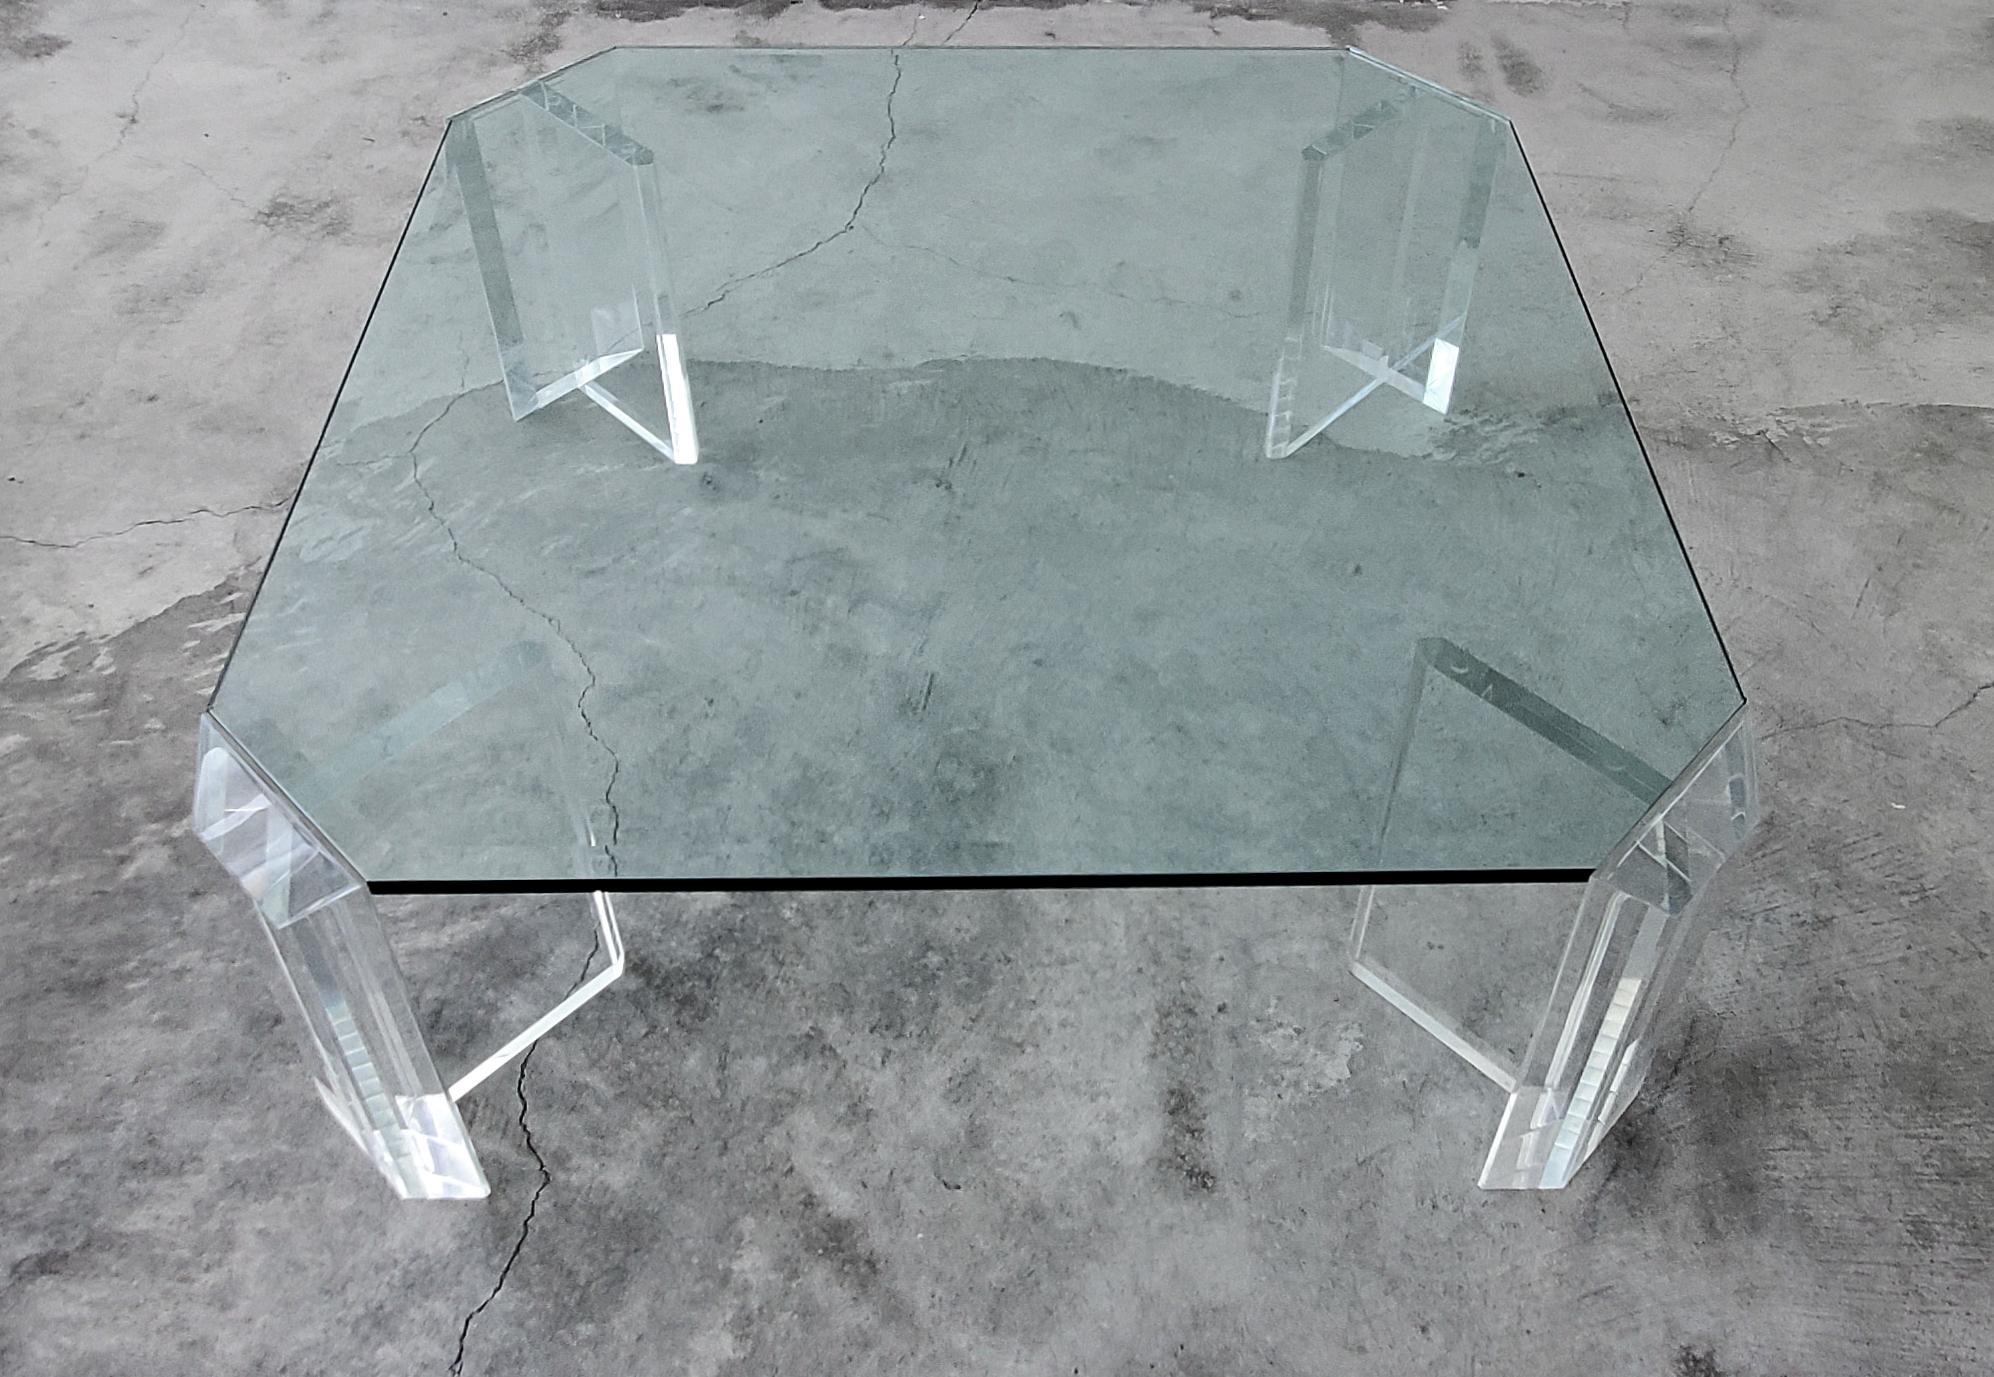 A stunning example of vintage Lucite, by the Master of Lucite himself, Charles Hollis Jones. This thick Lucite midcentury coffee table is large but the combination of glass and lucite takes up little visual space. The thick diagonal cut sections of